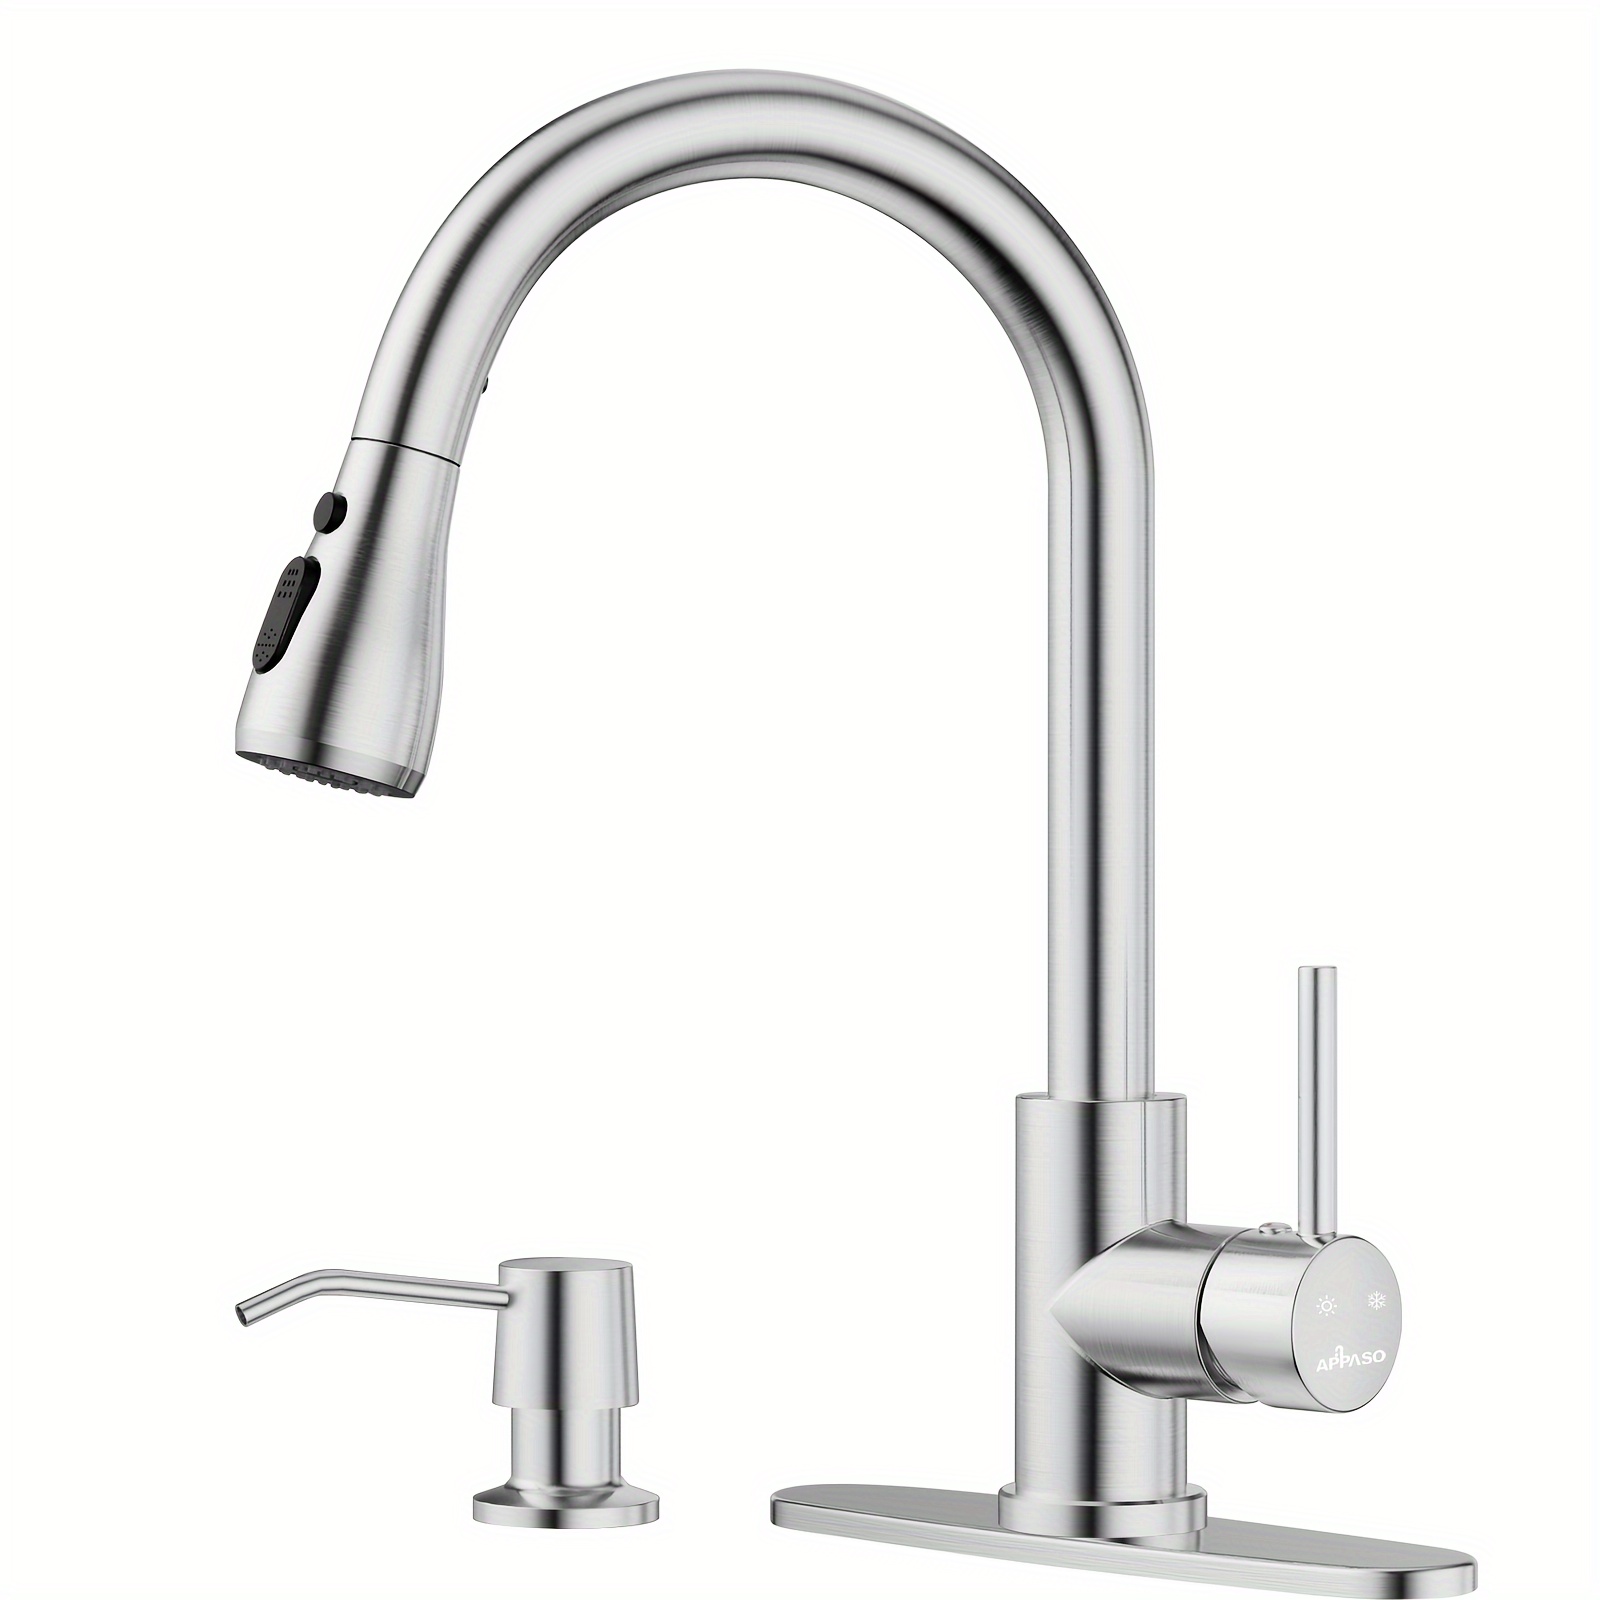 

Appaso Kitchen Faucets With Soap Dispenser, Solid Stainless Steel Kitchen Faucet With Pull Down Sprayer 3 Modes, Brushed Nickel Modern Kitchen Sink Faucets With Sprayer, High Arch Single Handle Faucet